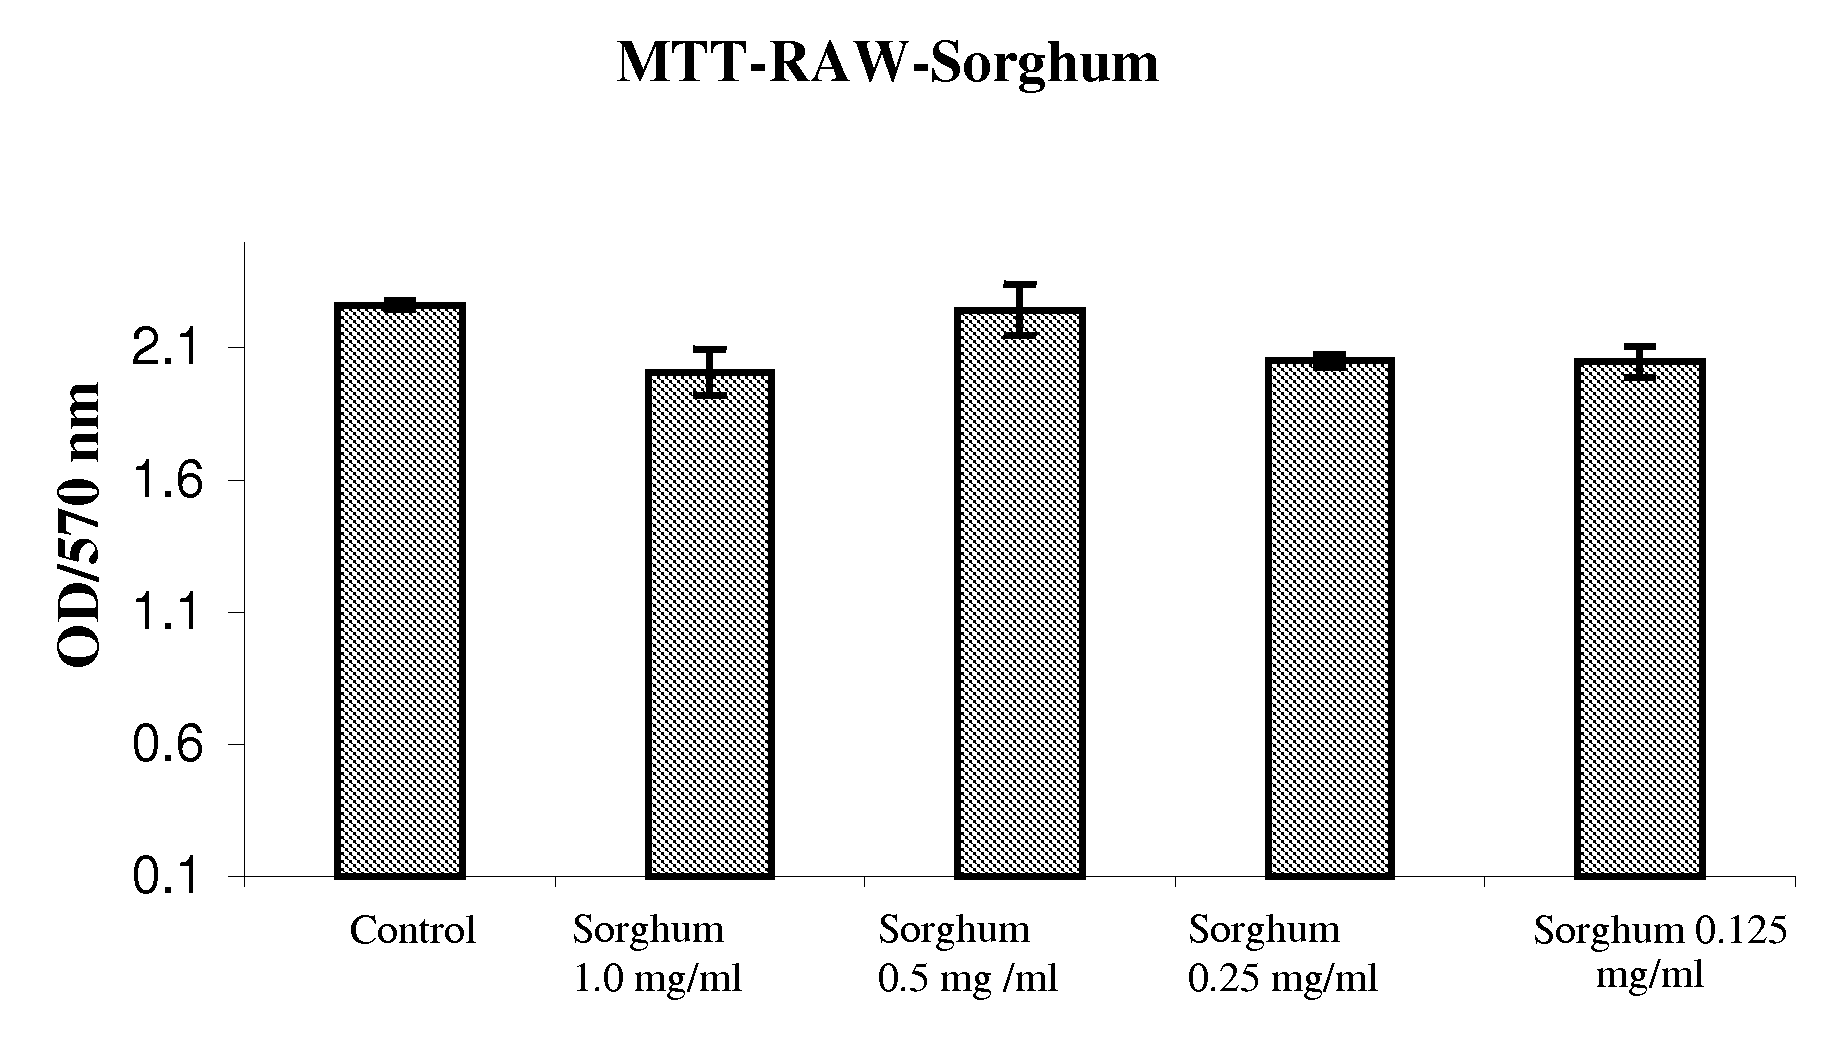 Sorghum Extract Compositions